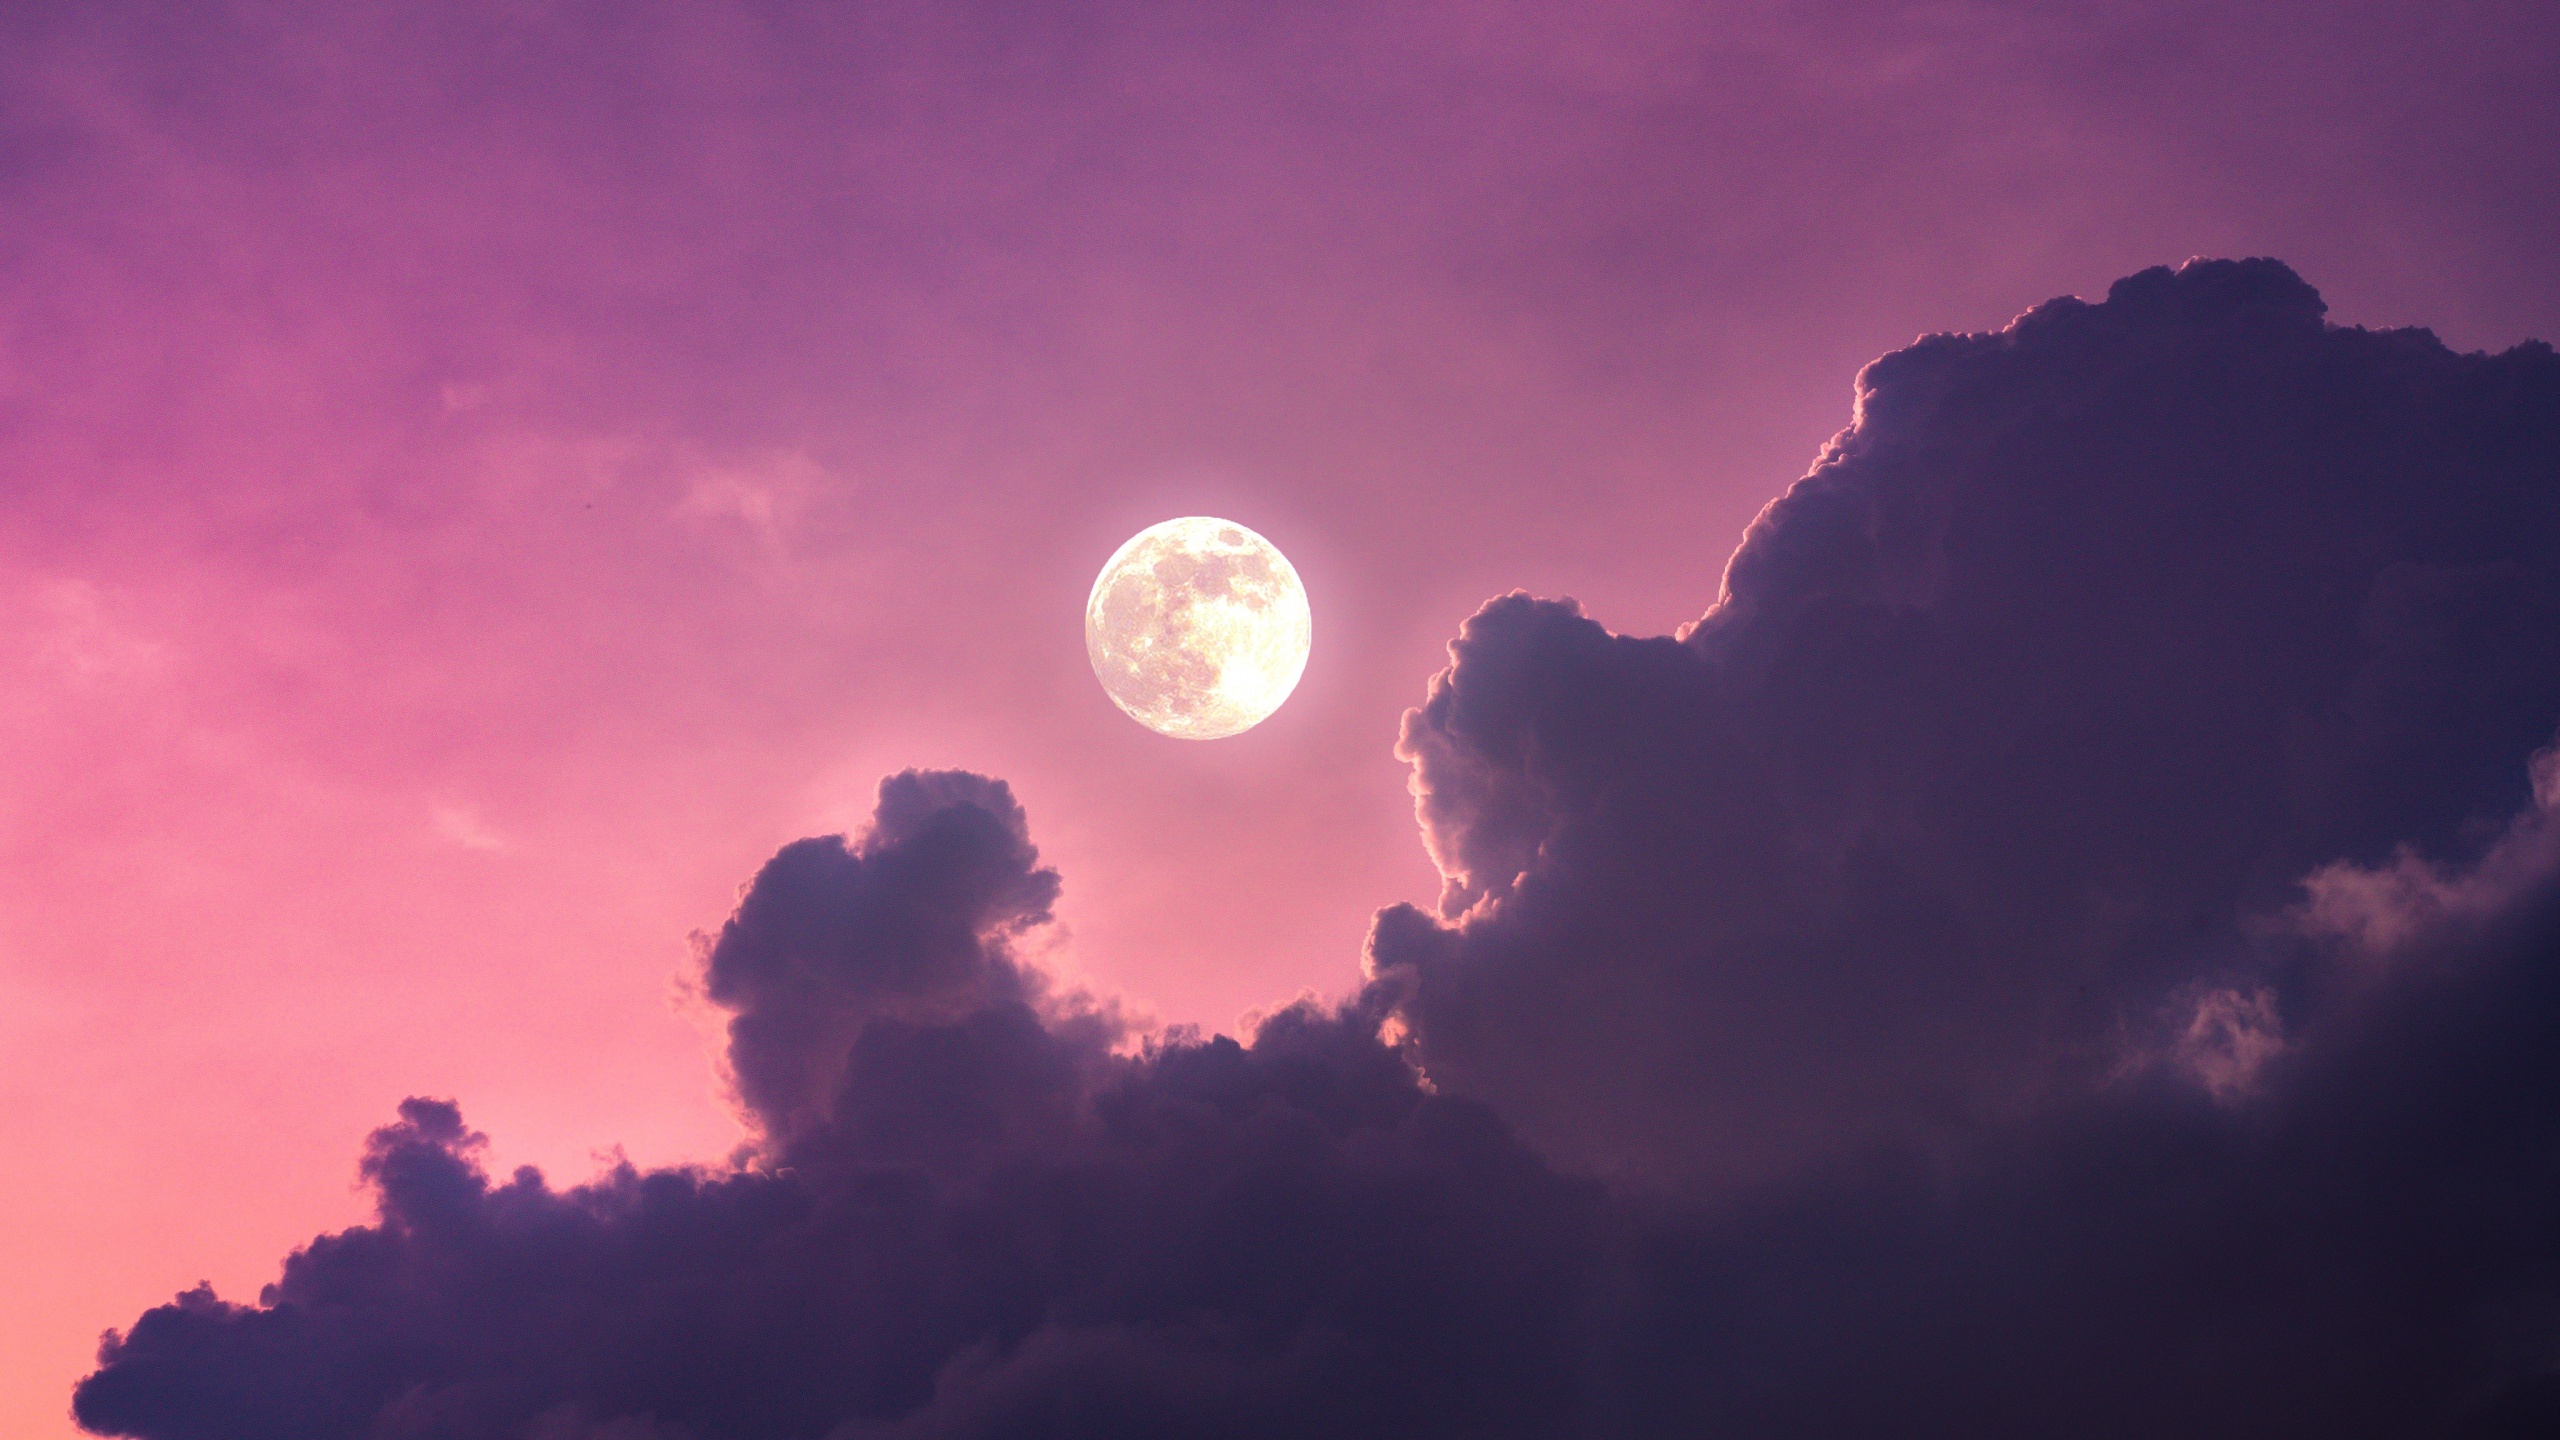 Full Moon 4k Wallpaper Clouds Pink Sky Nature 1653 Download images with clouds and sky with sunsets and sunrise in 4k and 8k resolution for iphone and android. full moon 4k wallpaper clouds pink